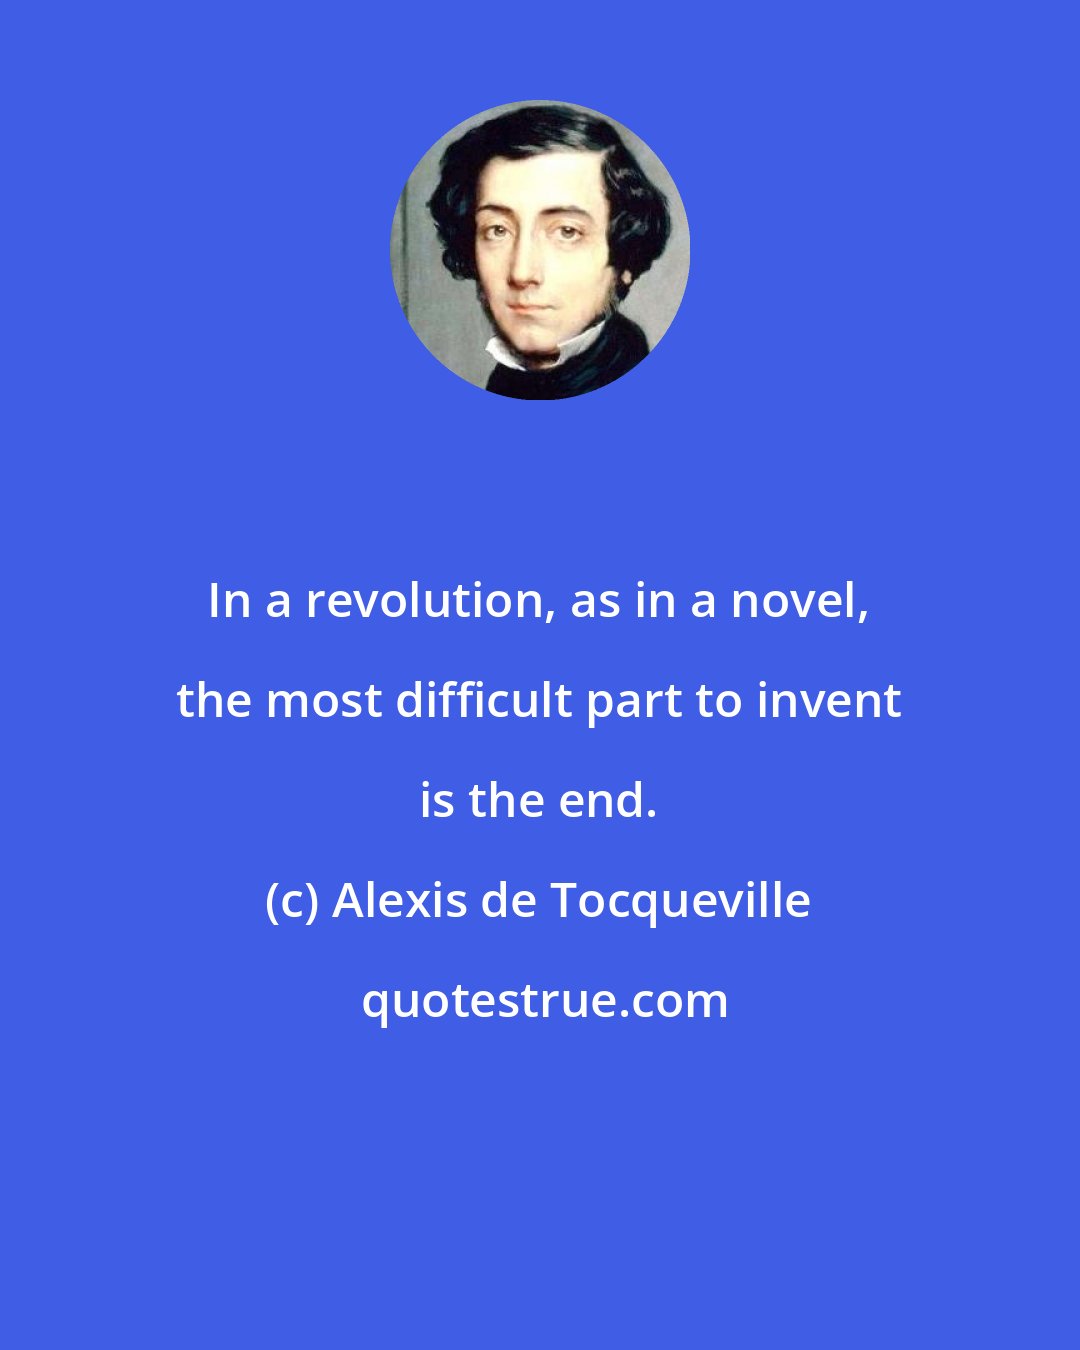 Alexis de Tocqueville: In a revolution, as in a novel, the most difficult part to invent is the end.